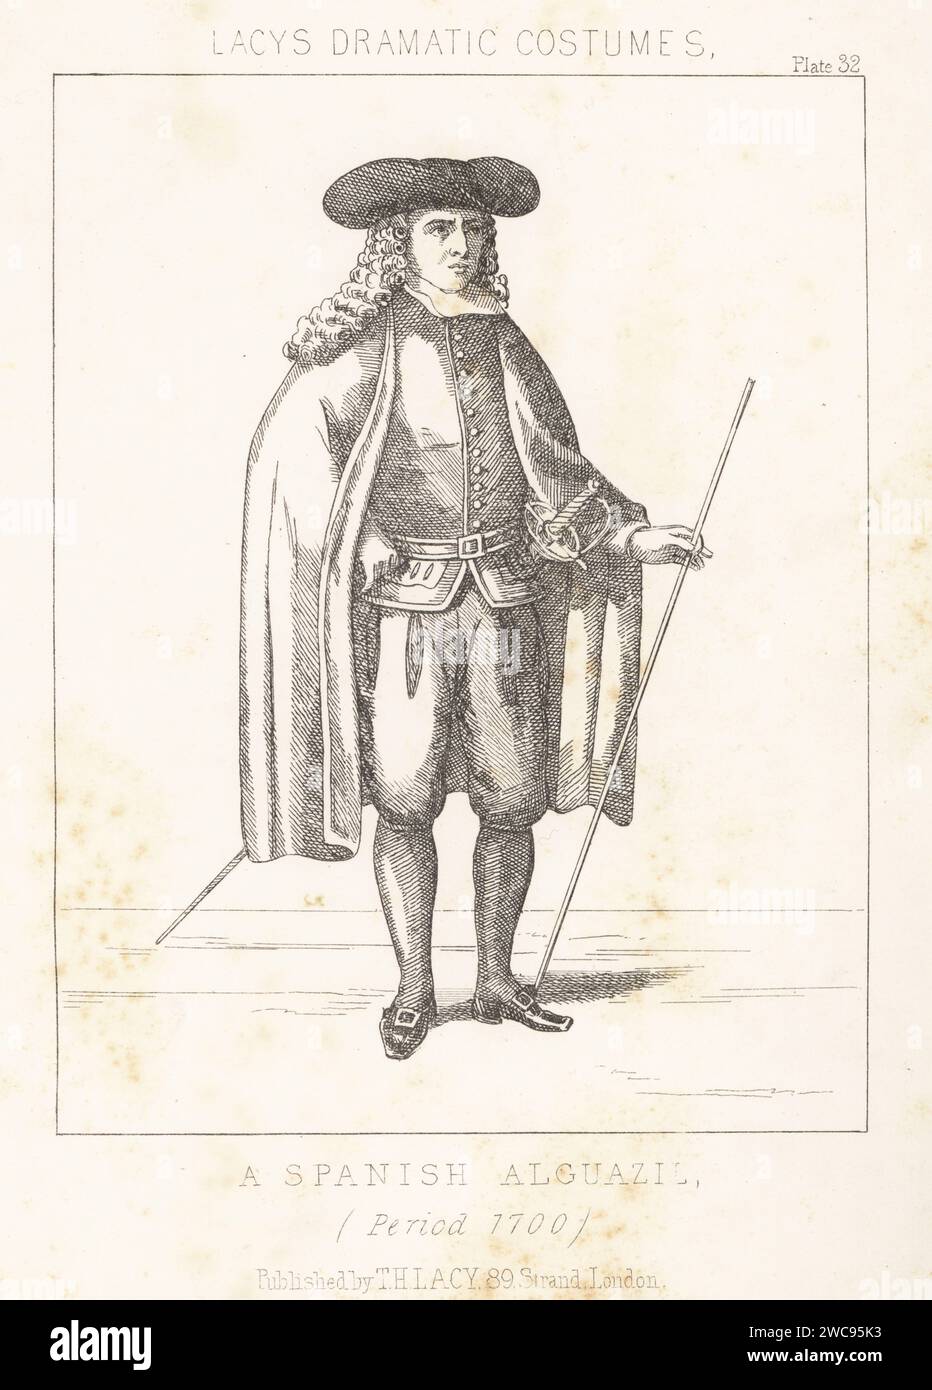 Costume of a Spanish Alguacil, a judge, sheriff or bailiff. In cap, powdered wig, cloak, doublet, breeches, buckle shoes, with sword and staff. A Spanish Alguazil, 18th century. Lithograph from Thomas Hailes Lacy's Male Costumes, Historical, National and Dramatic in 200 Plates, London, 1865. Lacy (1809-1873) was a British actor, playwright, theatrical manager and publisher. Stock Photo